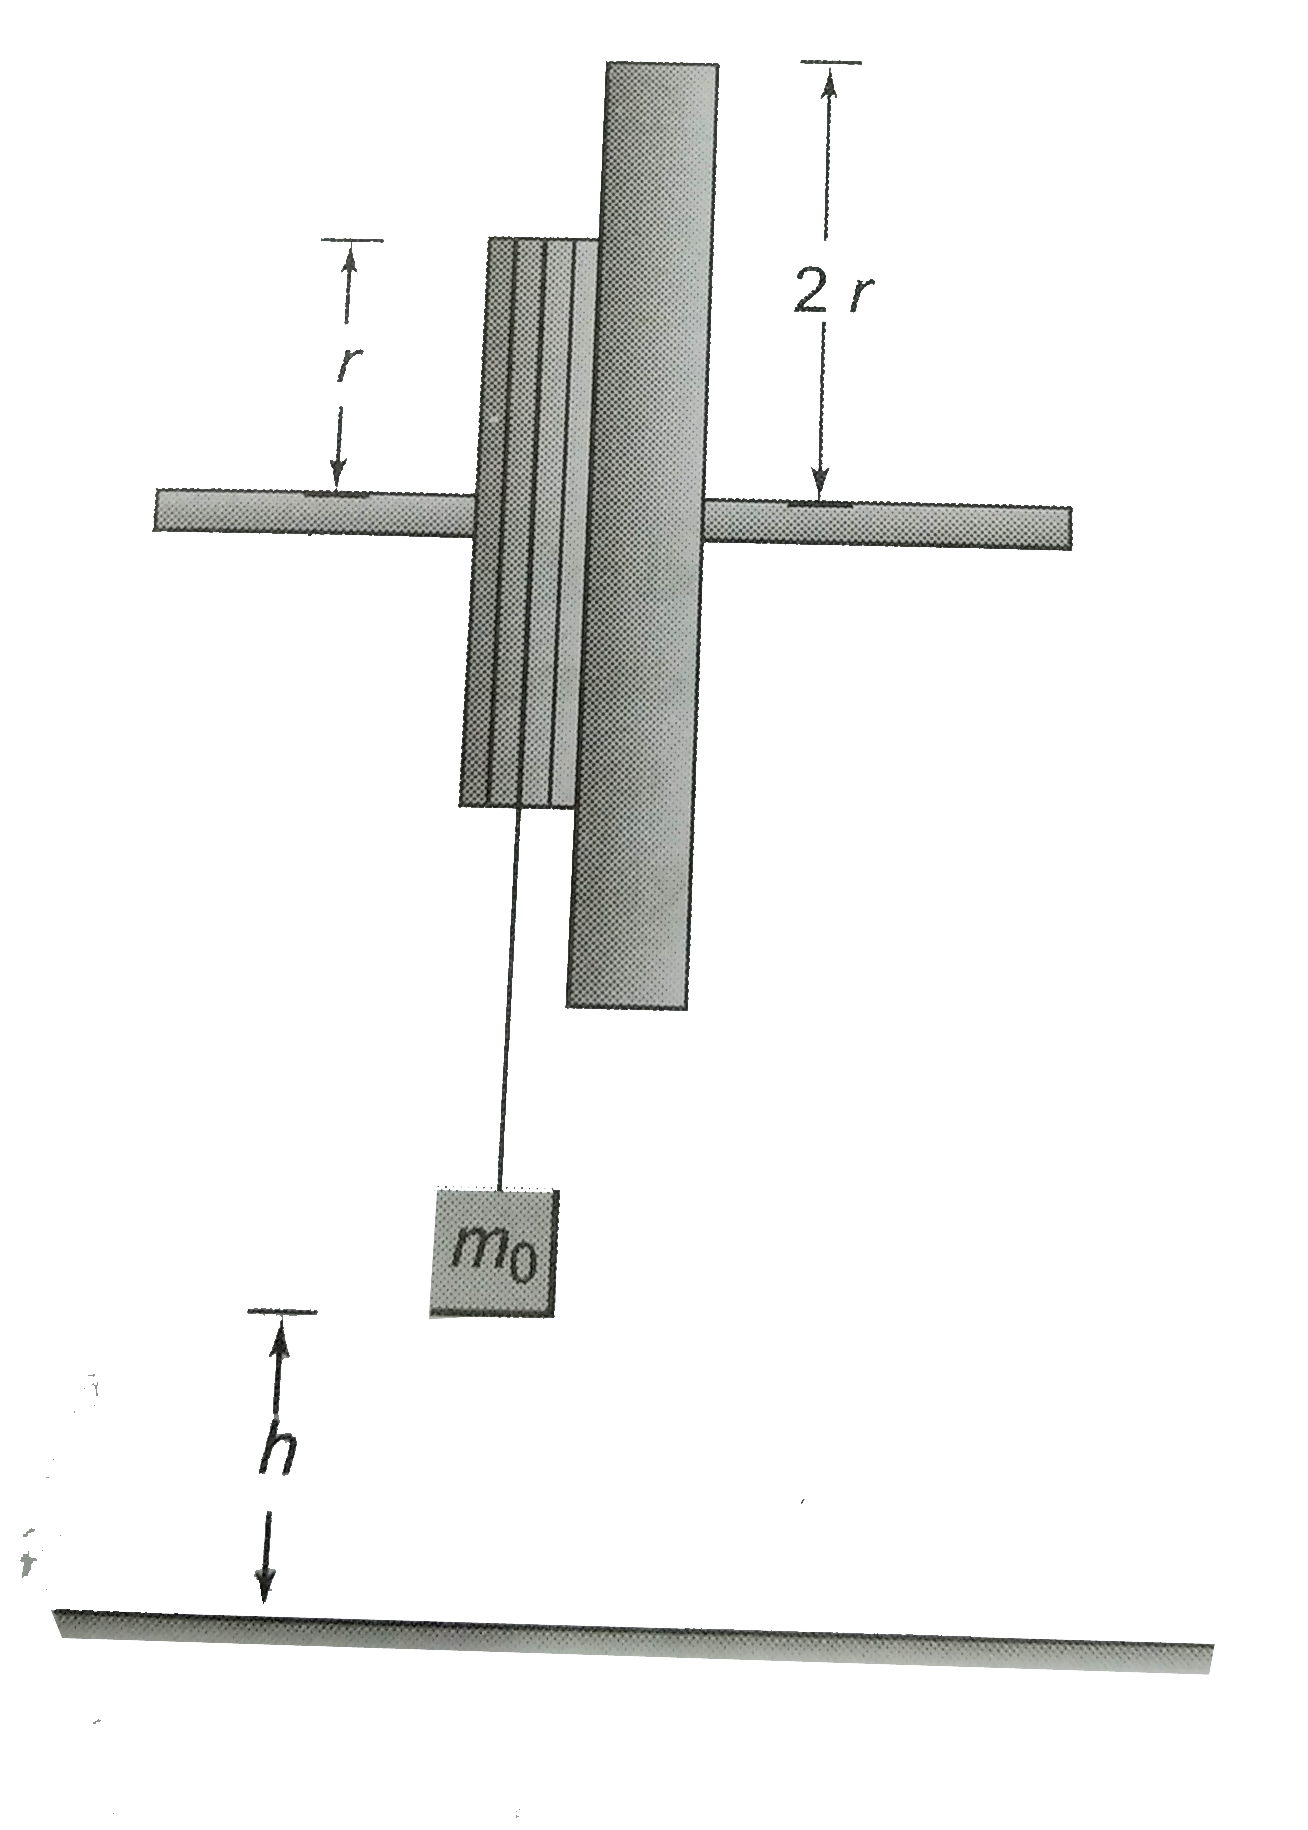 Two metal discs, one with radius r and mass m and the other with radius 2r and mass 2m, are welded together and mounted on a frictionless axis through their common center.   (a) What is the total moment of inertia of the two discs?   (b) A light string is wrapped around the edge of the smaller disc and a block of mass m(0) is suspended from the free end of the string. If the block is released from rest at a distance h, what is its speed just before it strikes the floor?